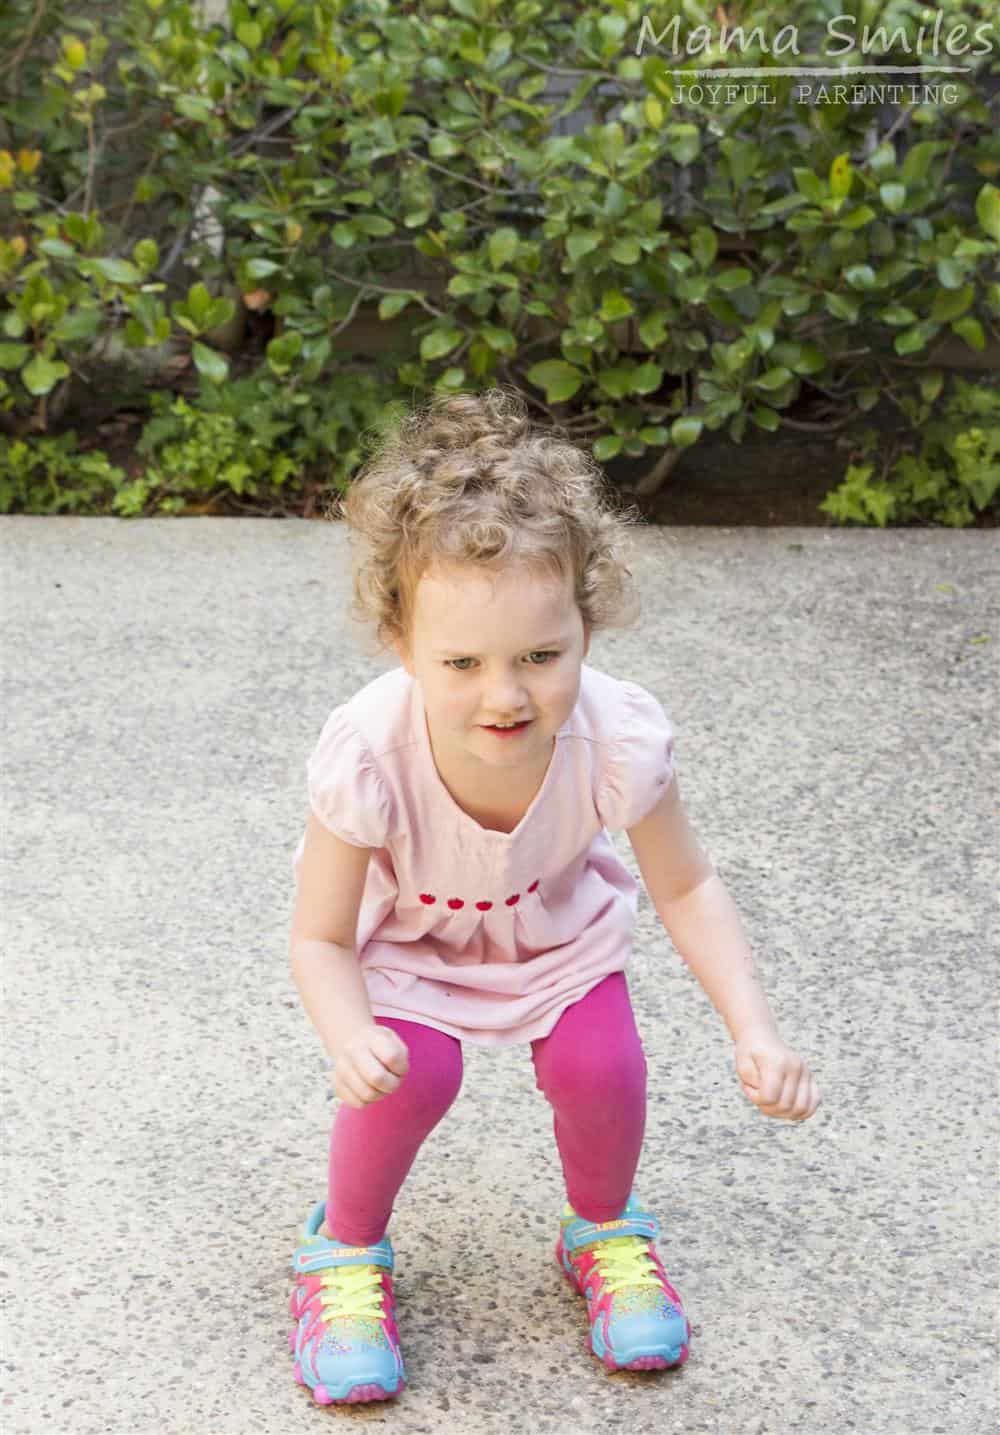 The Day My Preschooler's Dreams Came True - leaping for joy in her new light-up Stride Rite Leepz shoes from Zappos